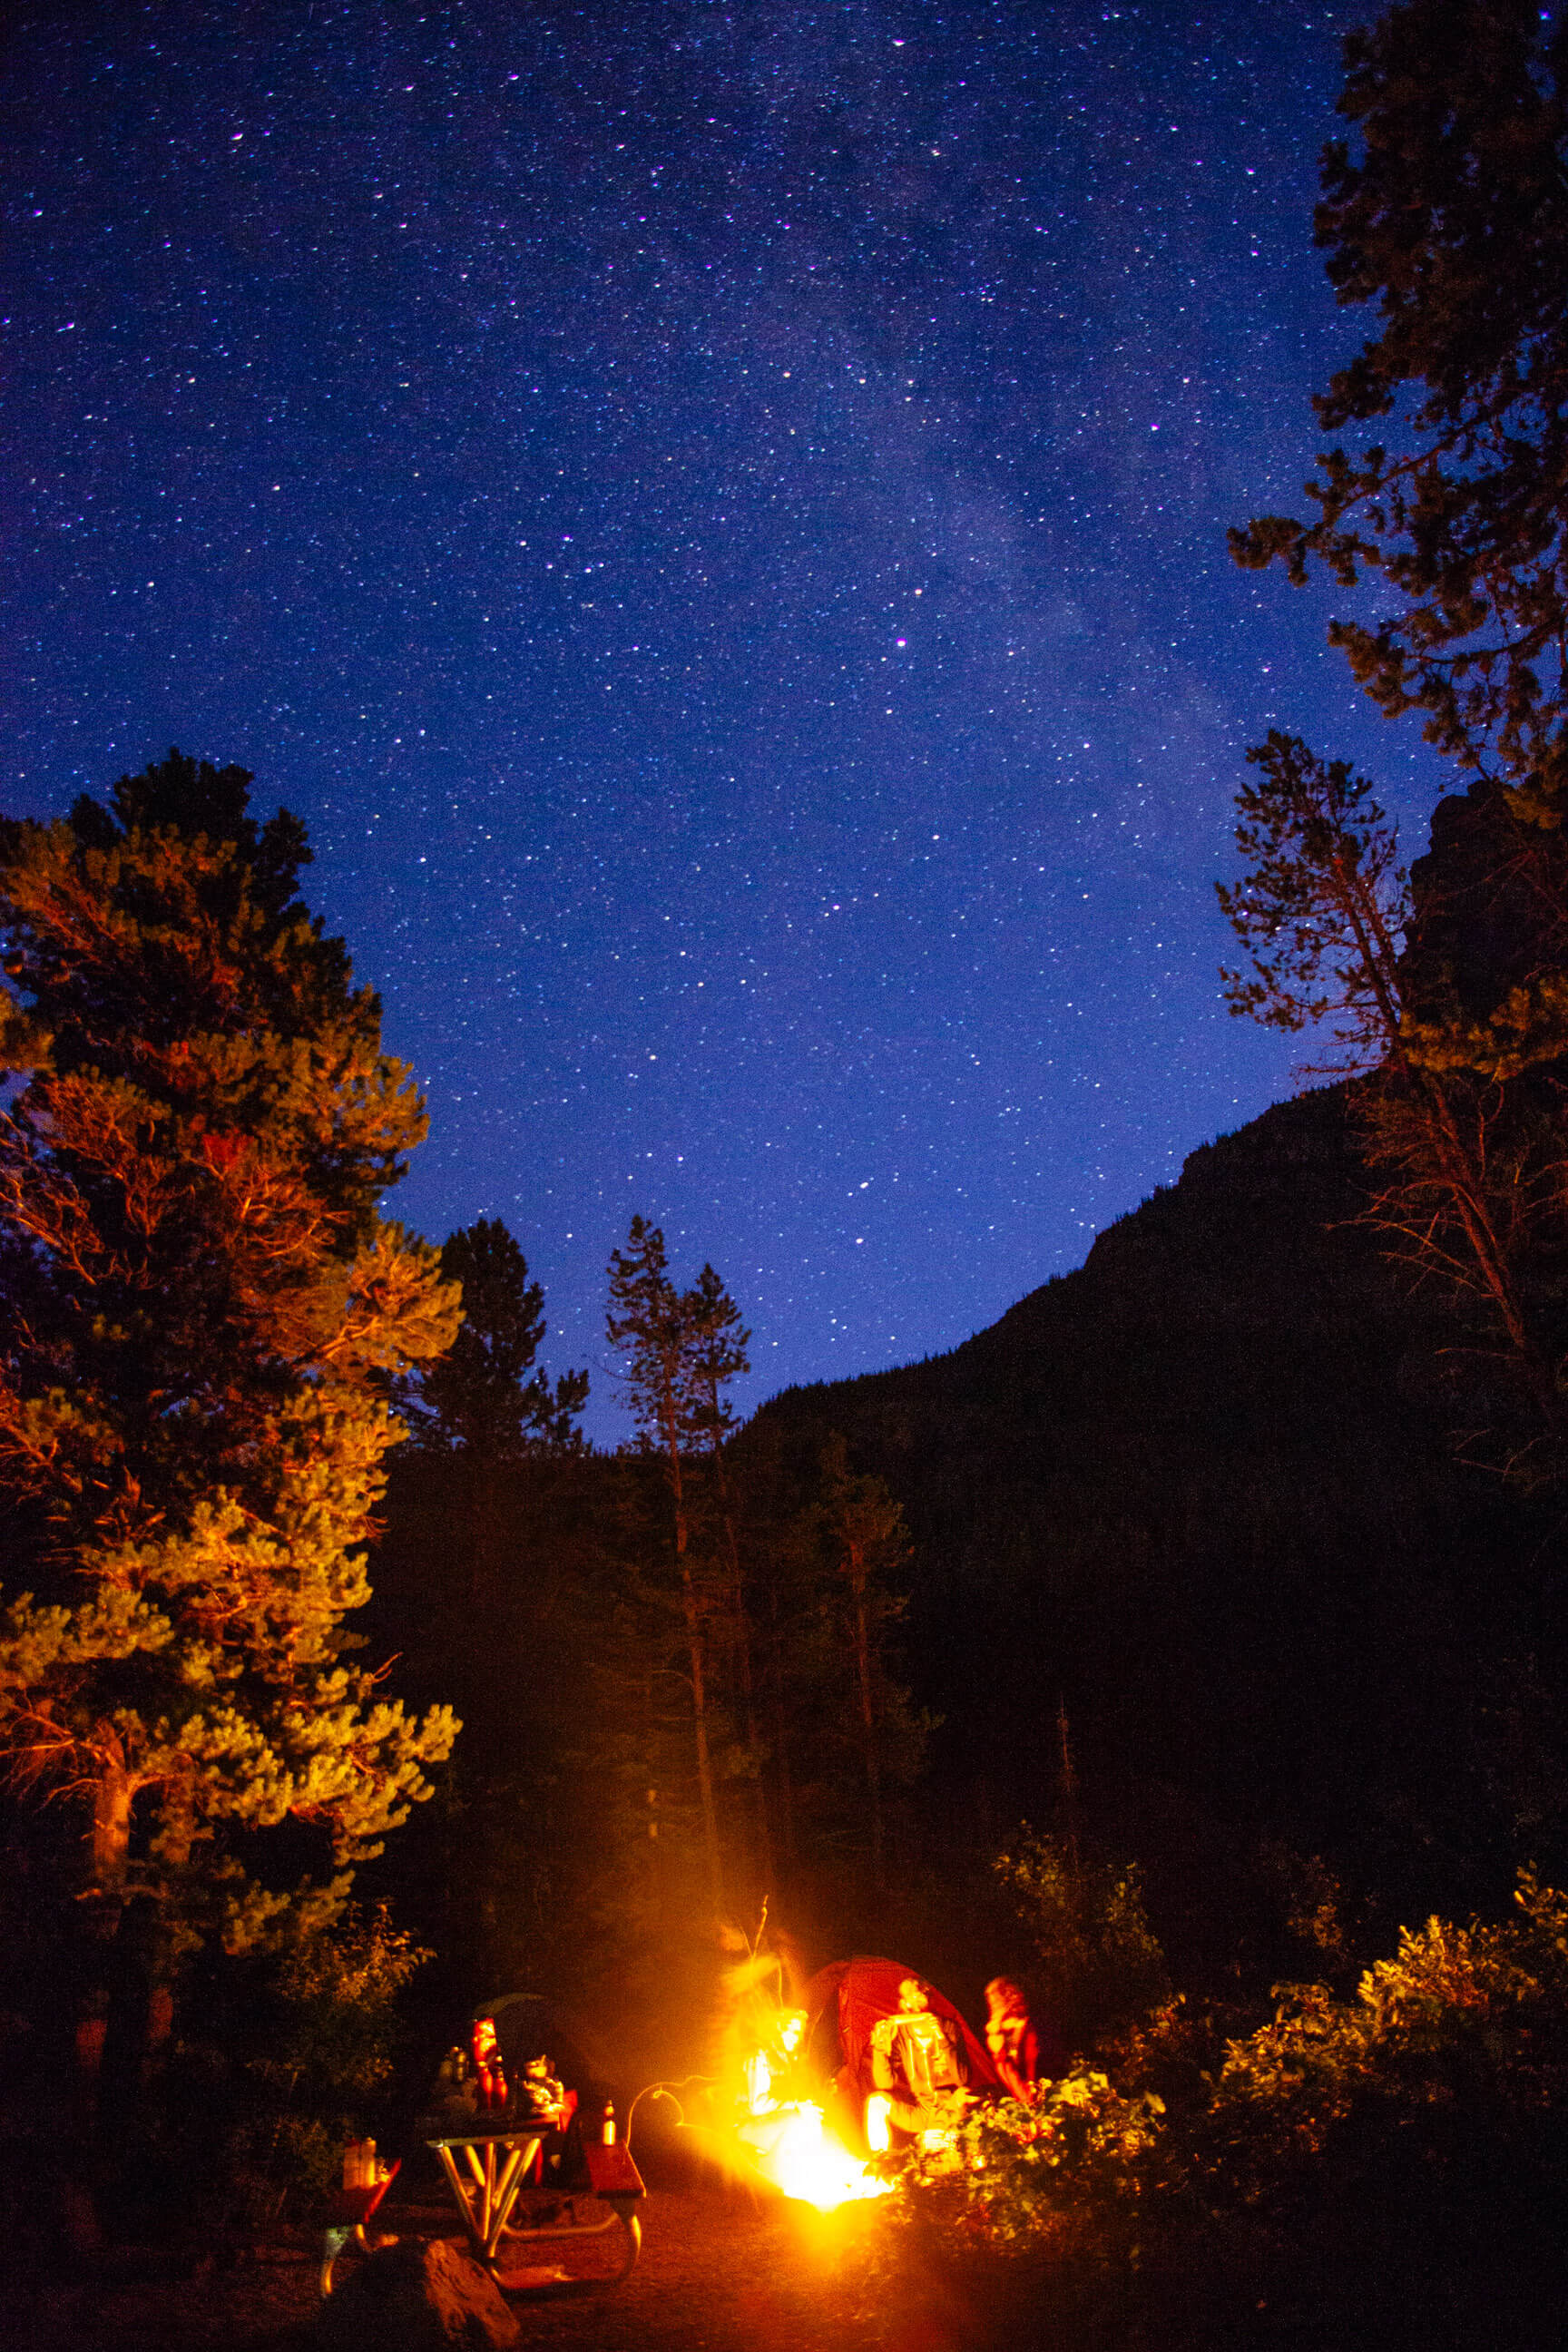 Campers sit near a glowing fire as stars populate the night sky in Glacier National Park in Montana